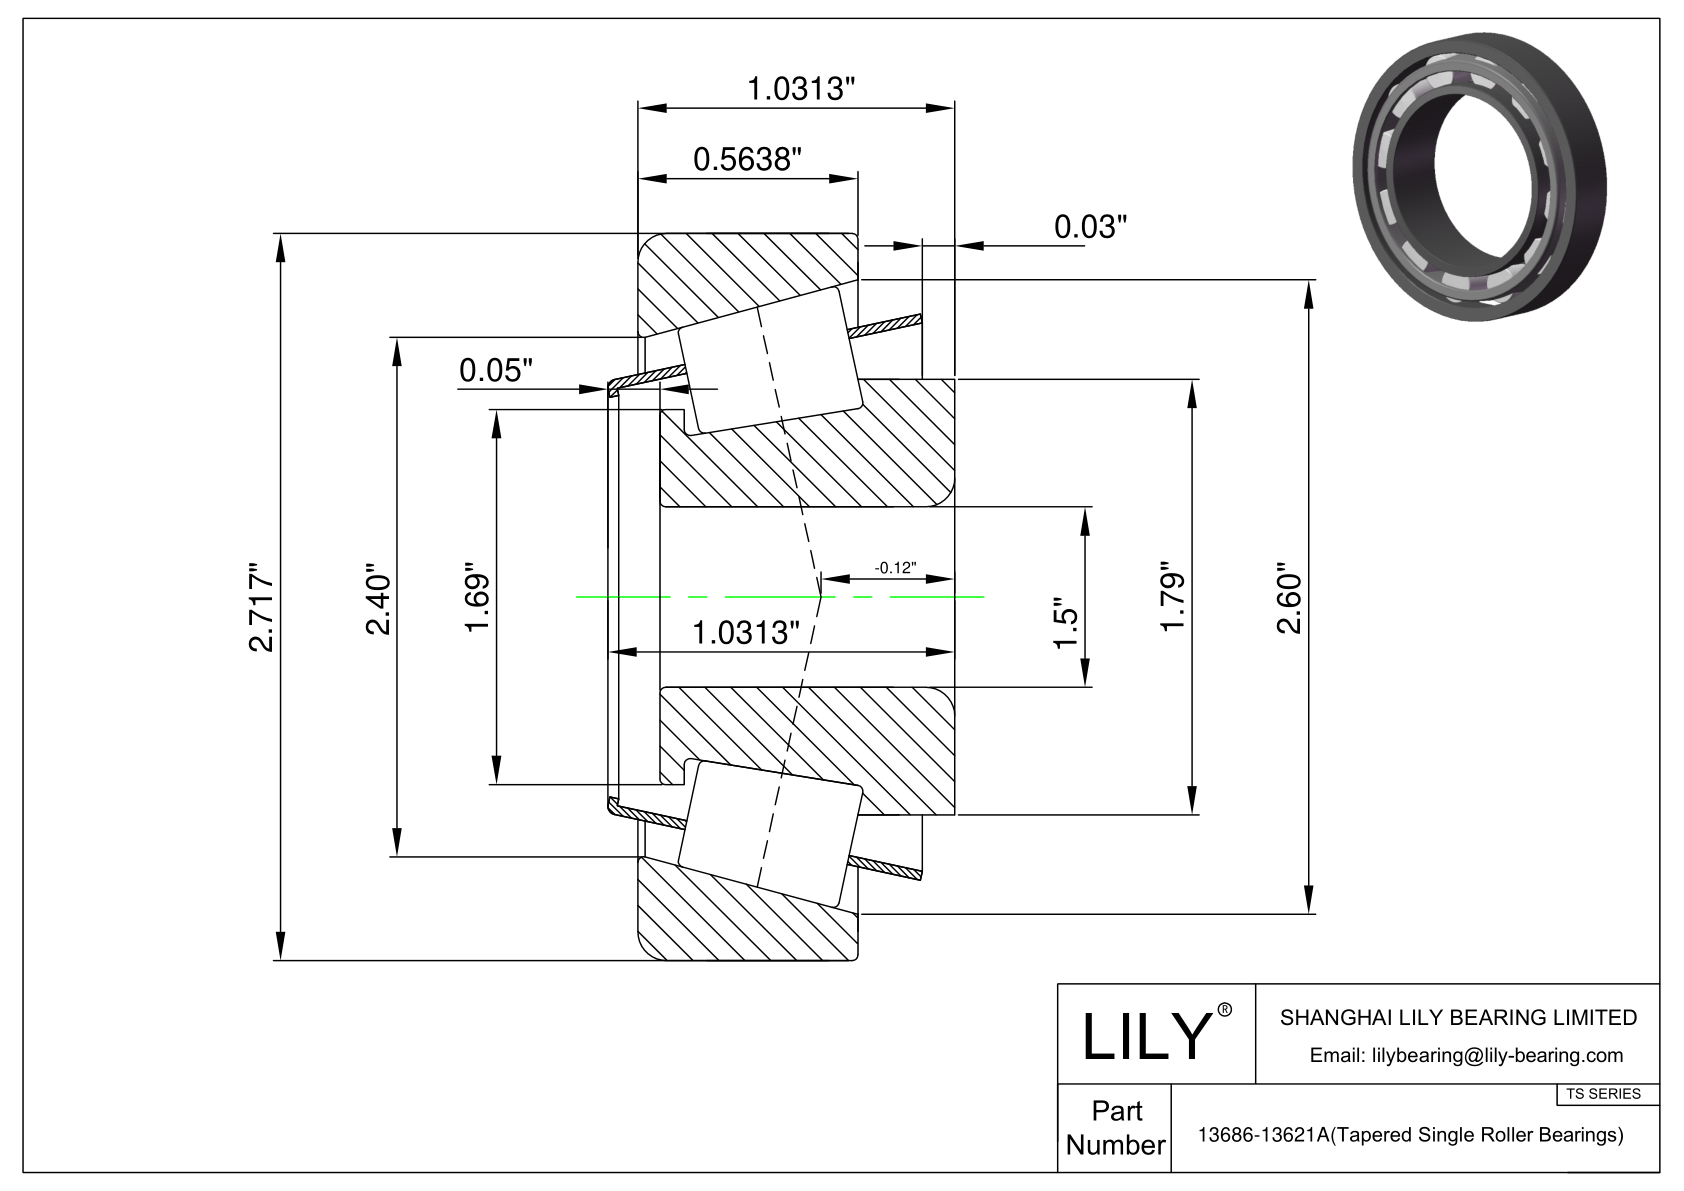 13686-13621A TS (Tapered Single Roller Bearings) (Imperial) cad drawing